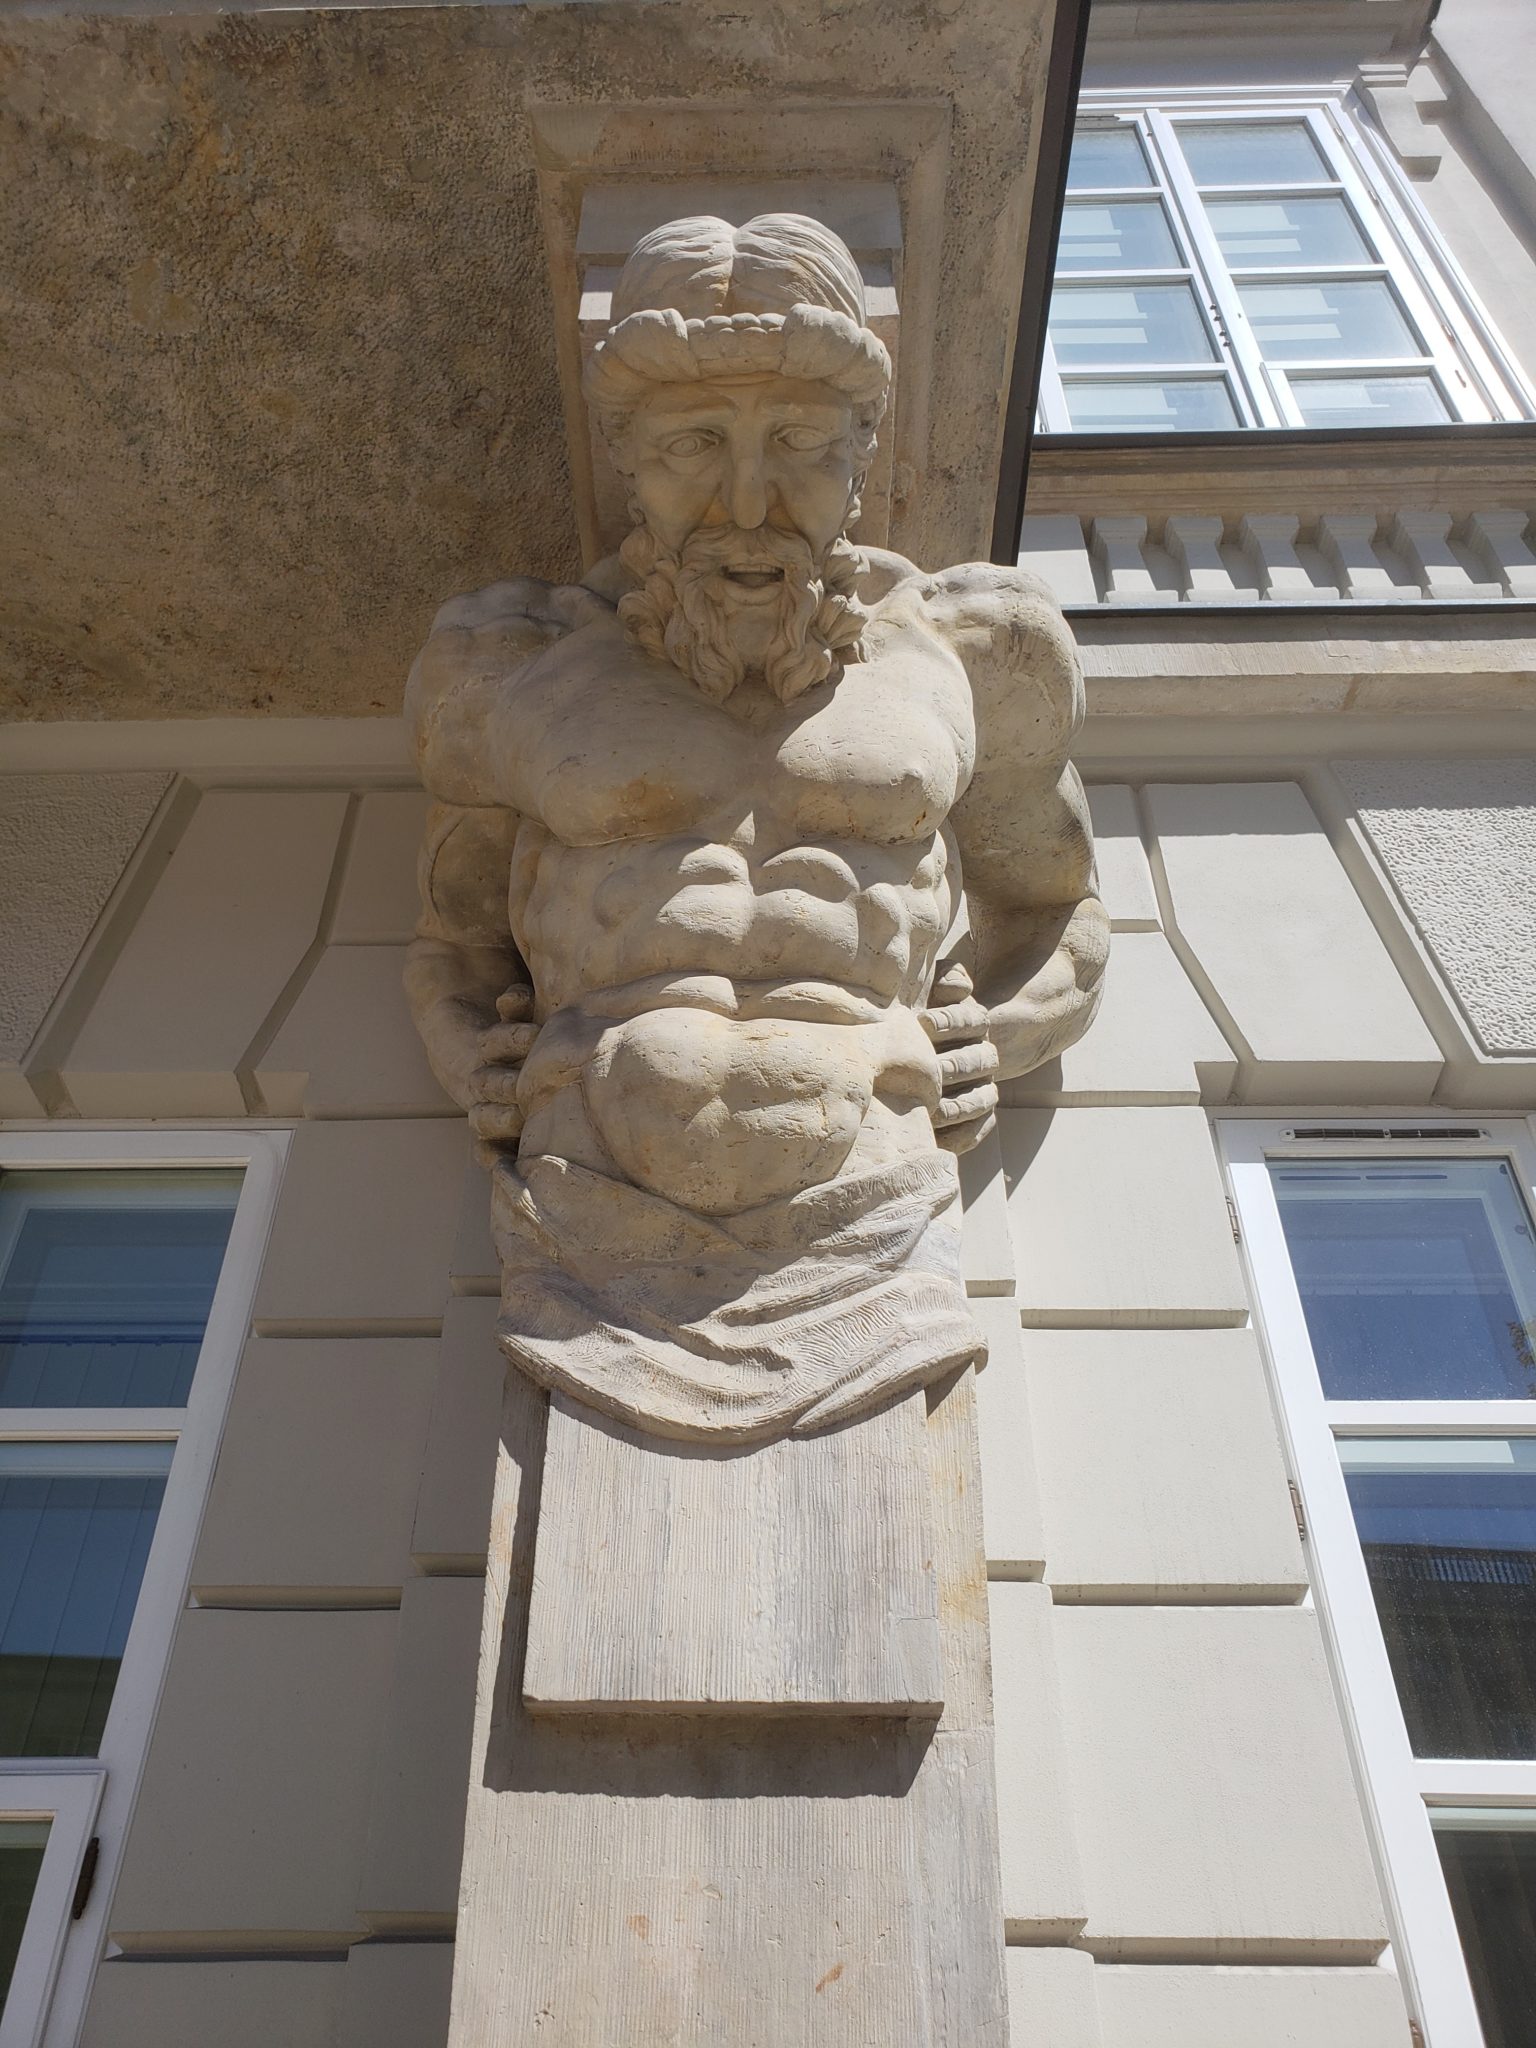 a statue of a man on a building